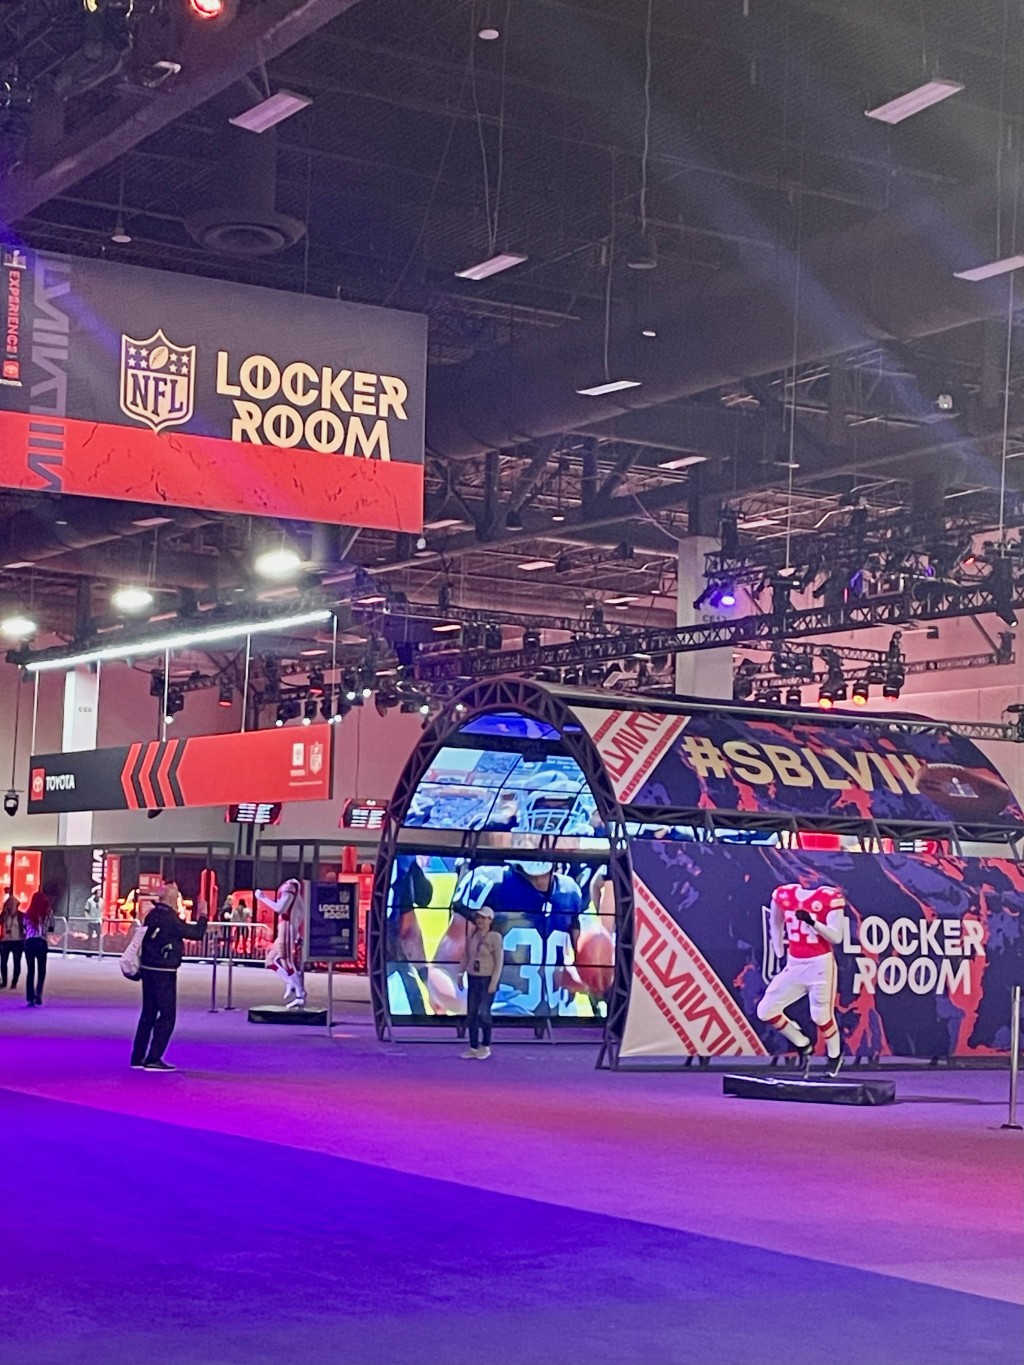 A view inside a large convention space with NFL event spaces